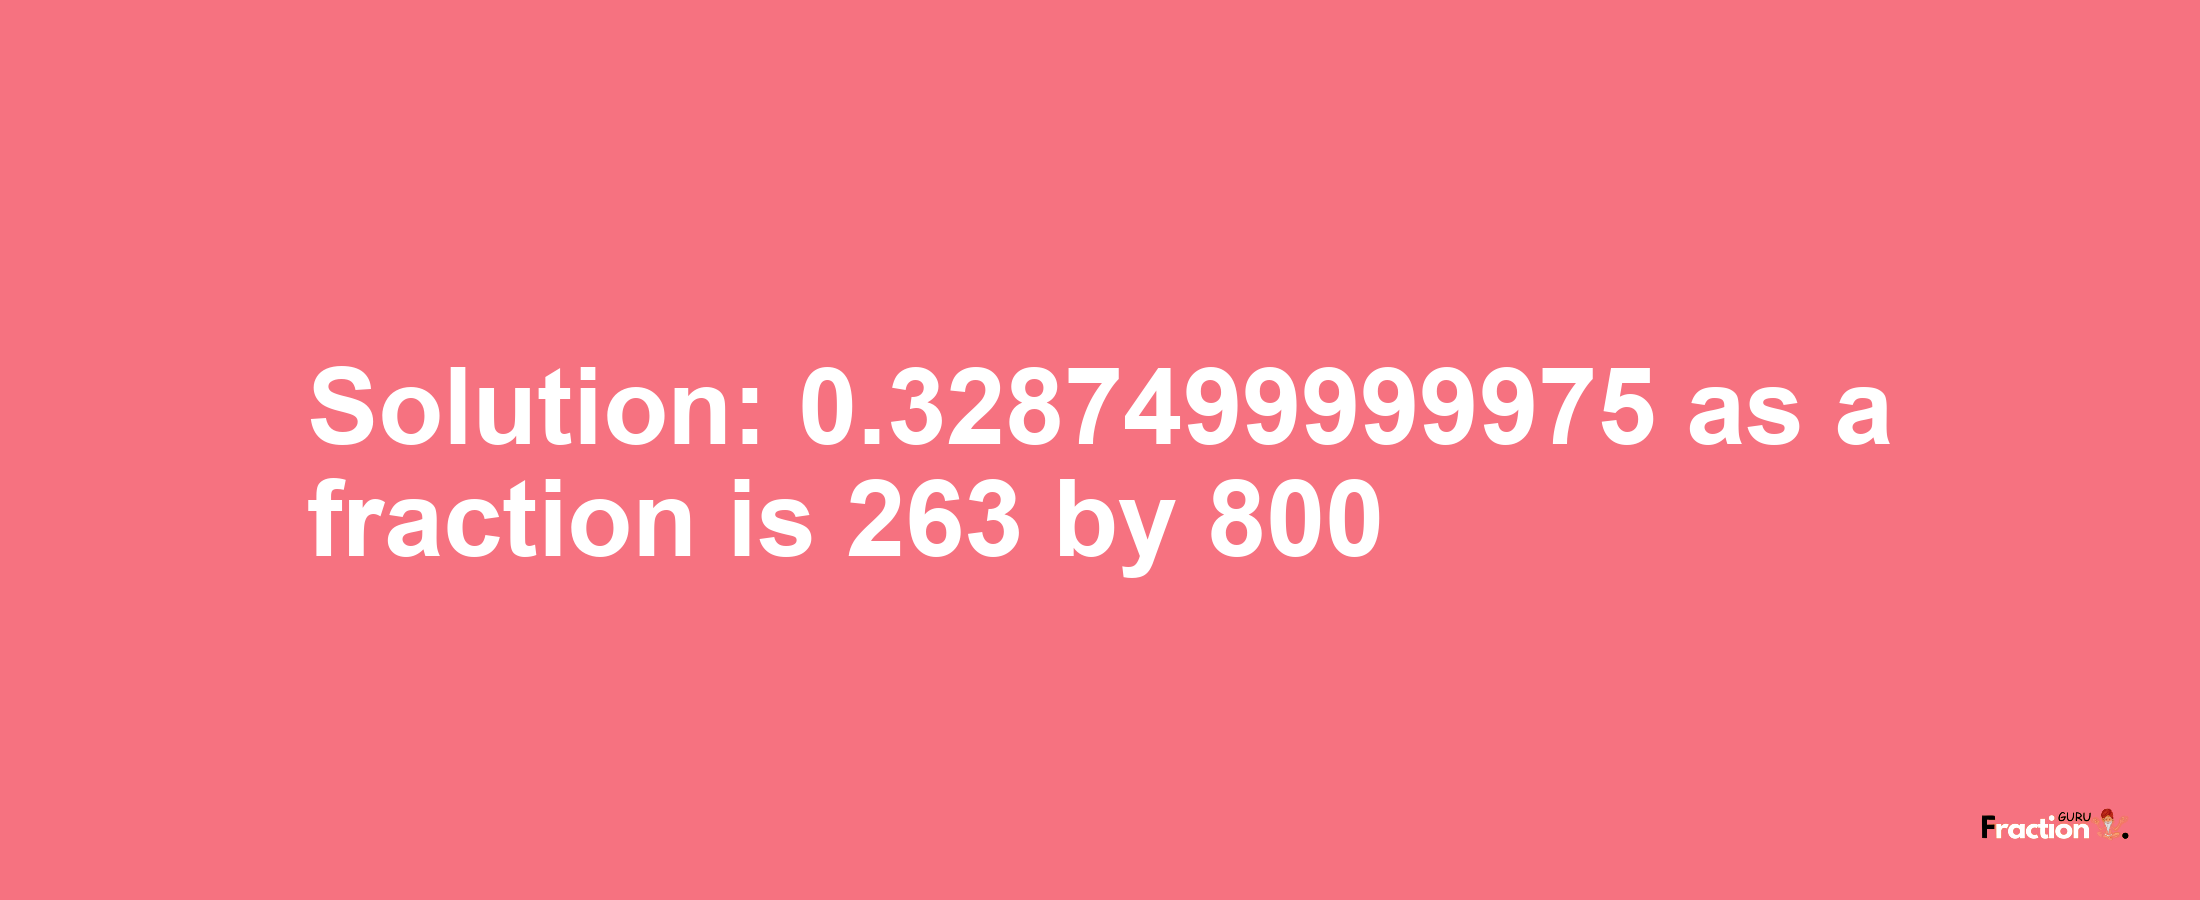 Solution:0.3287499999975 as a fraction is 263/800